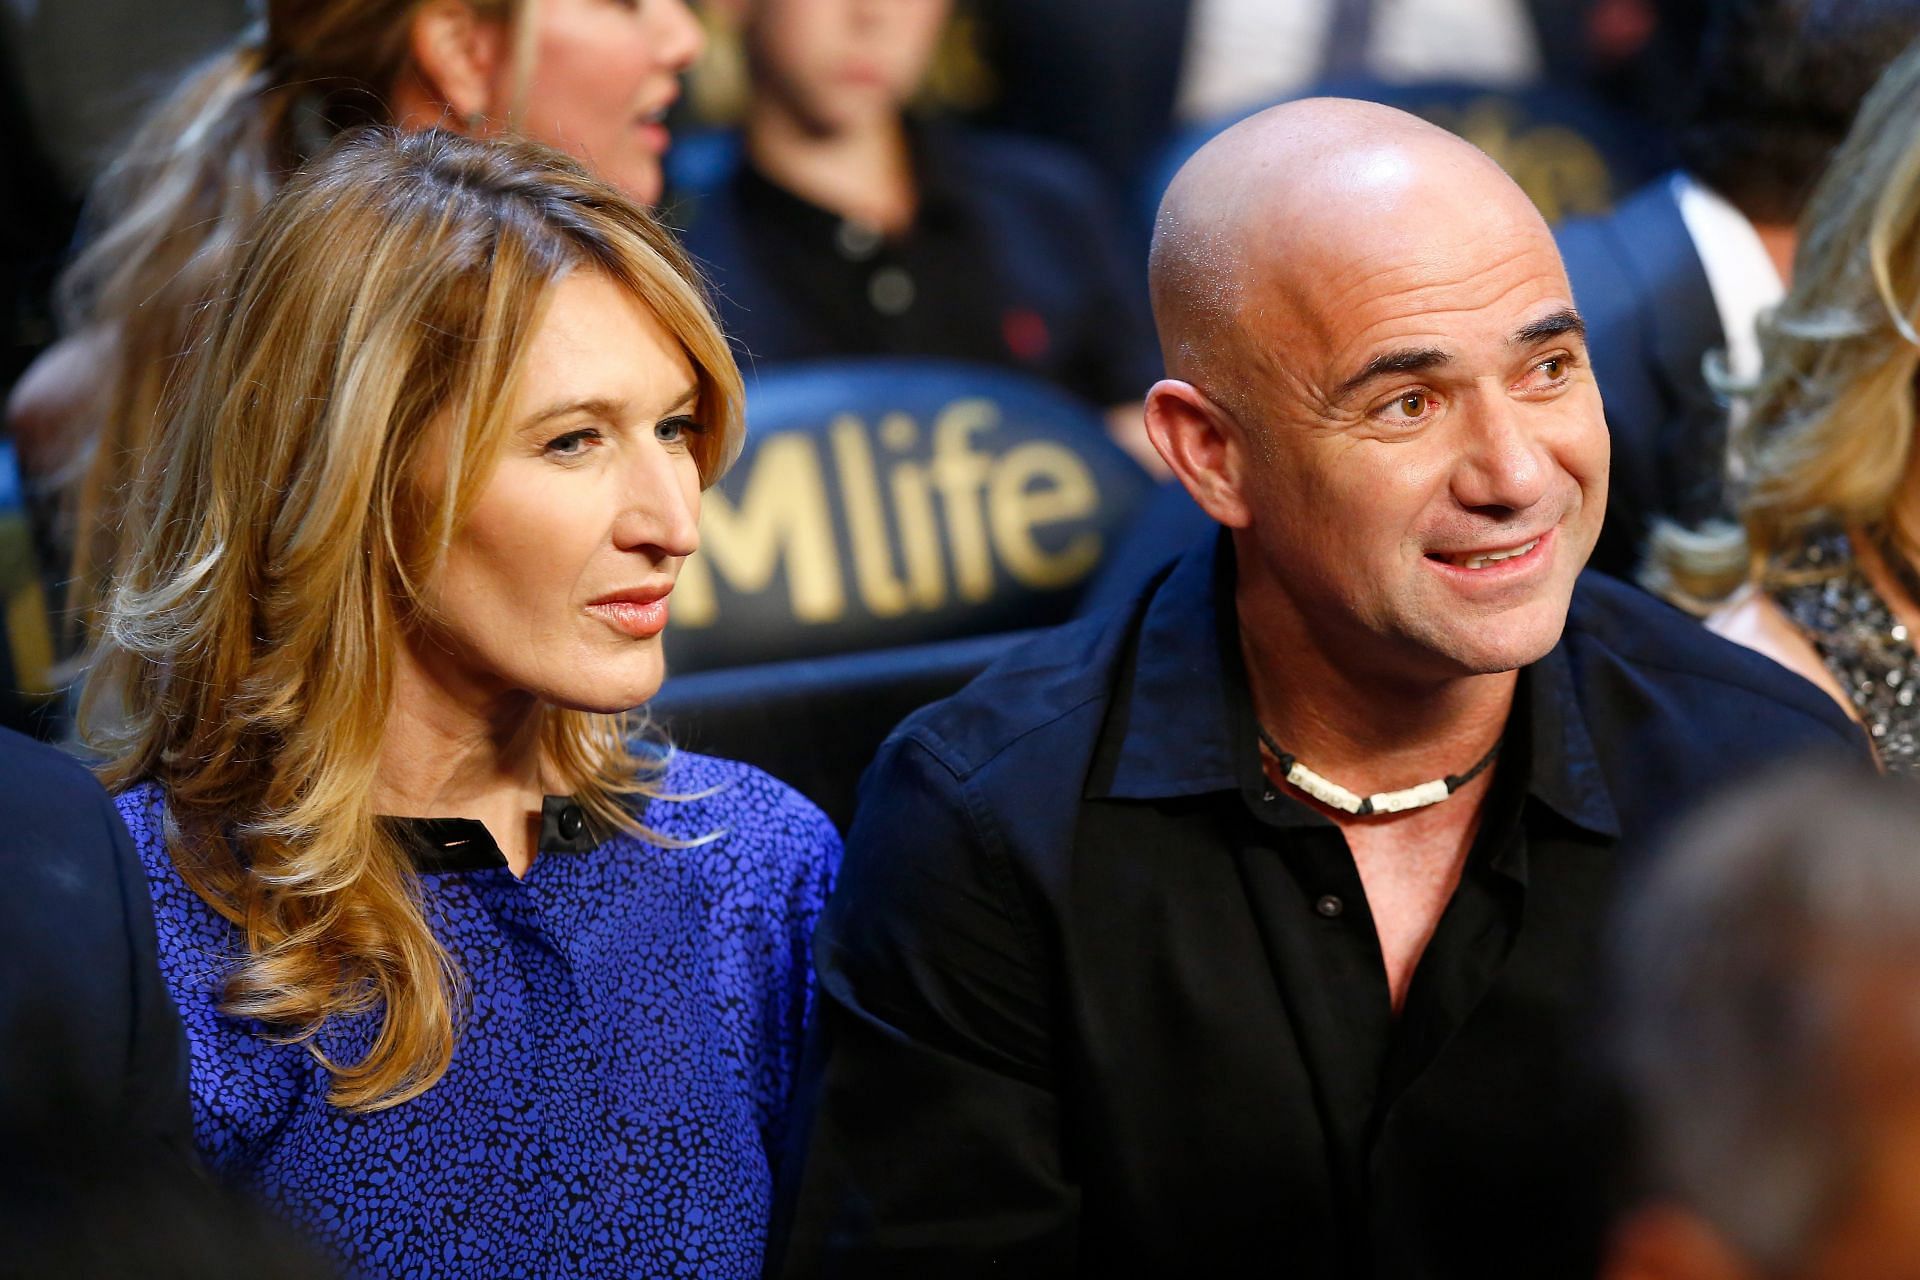 Andre Agassi pictured with his wife Steffi Graf